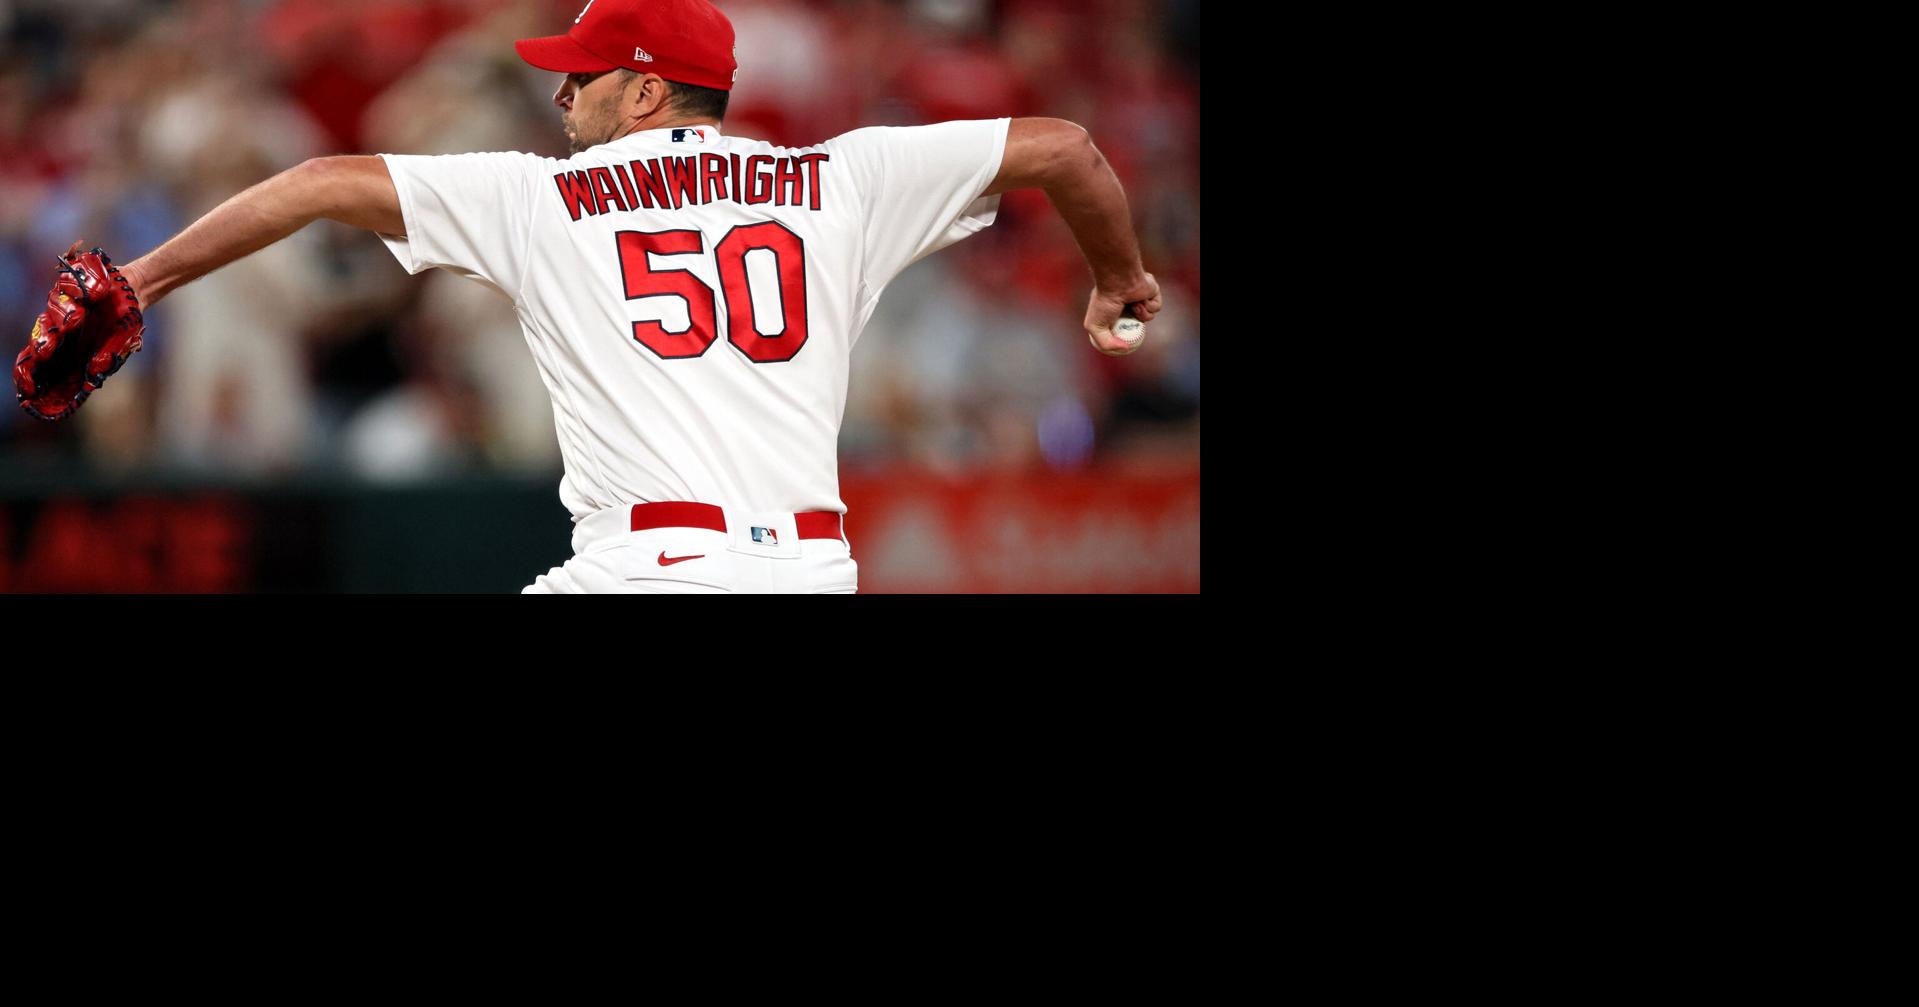 In an Era of Throwers, Adam Wainwright Is a Pitcher - The New York